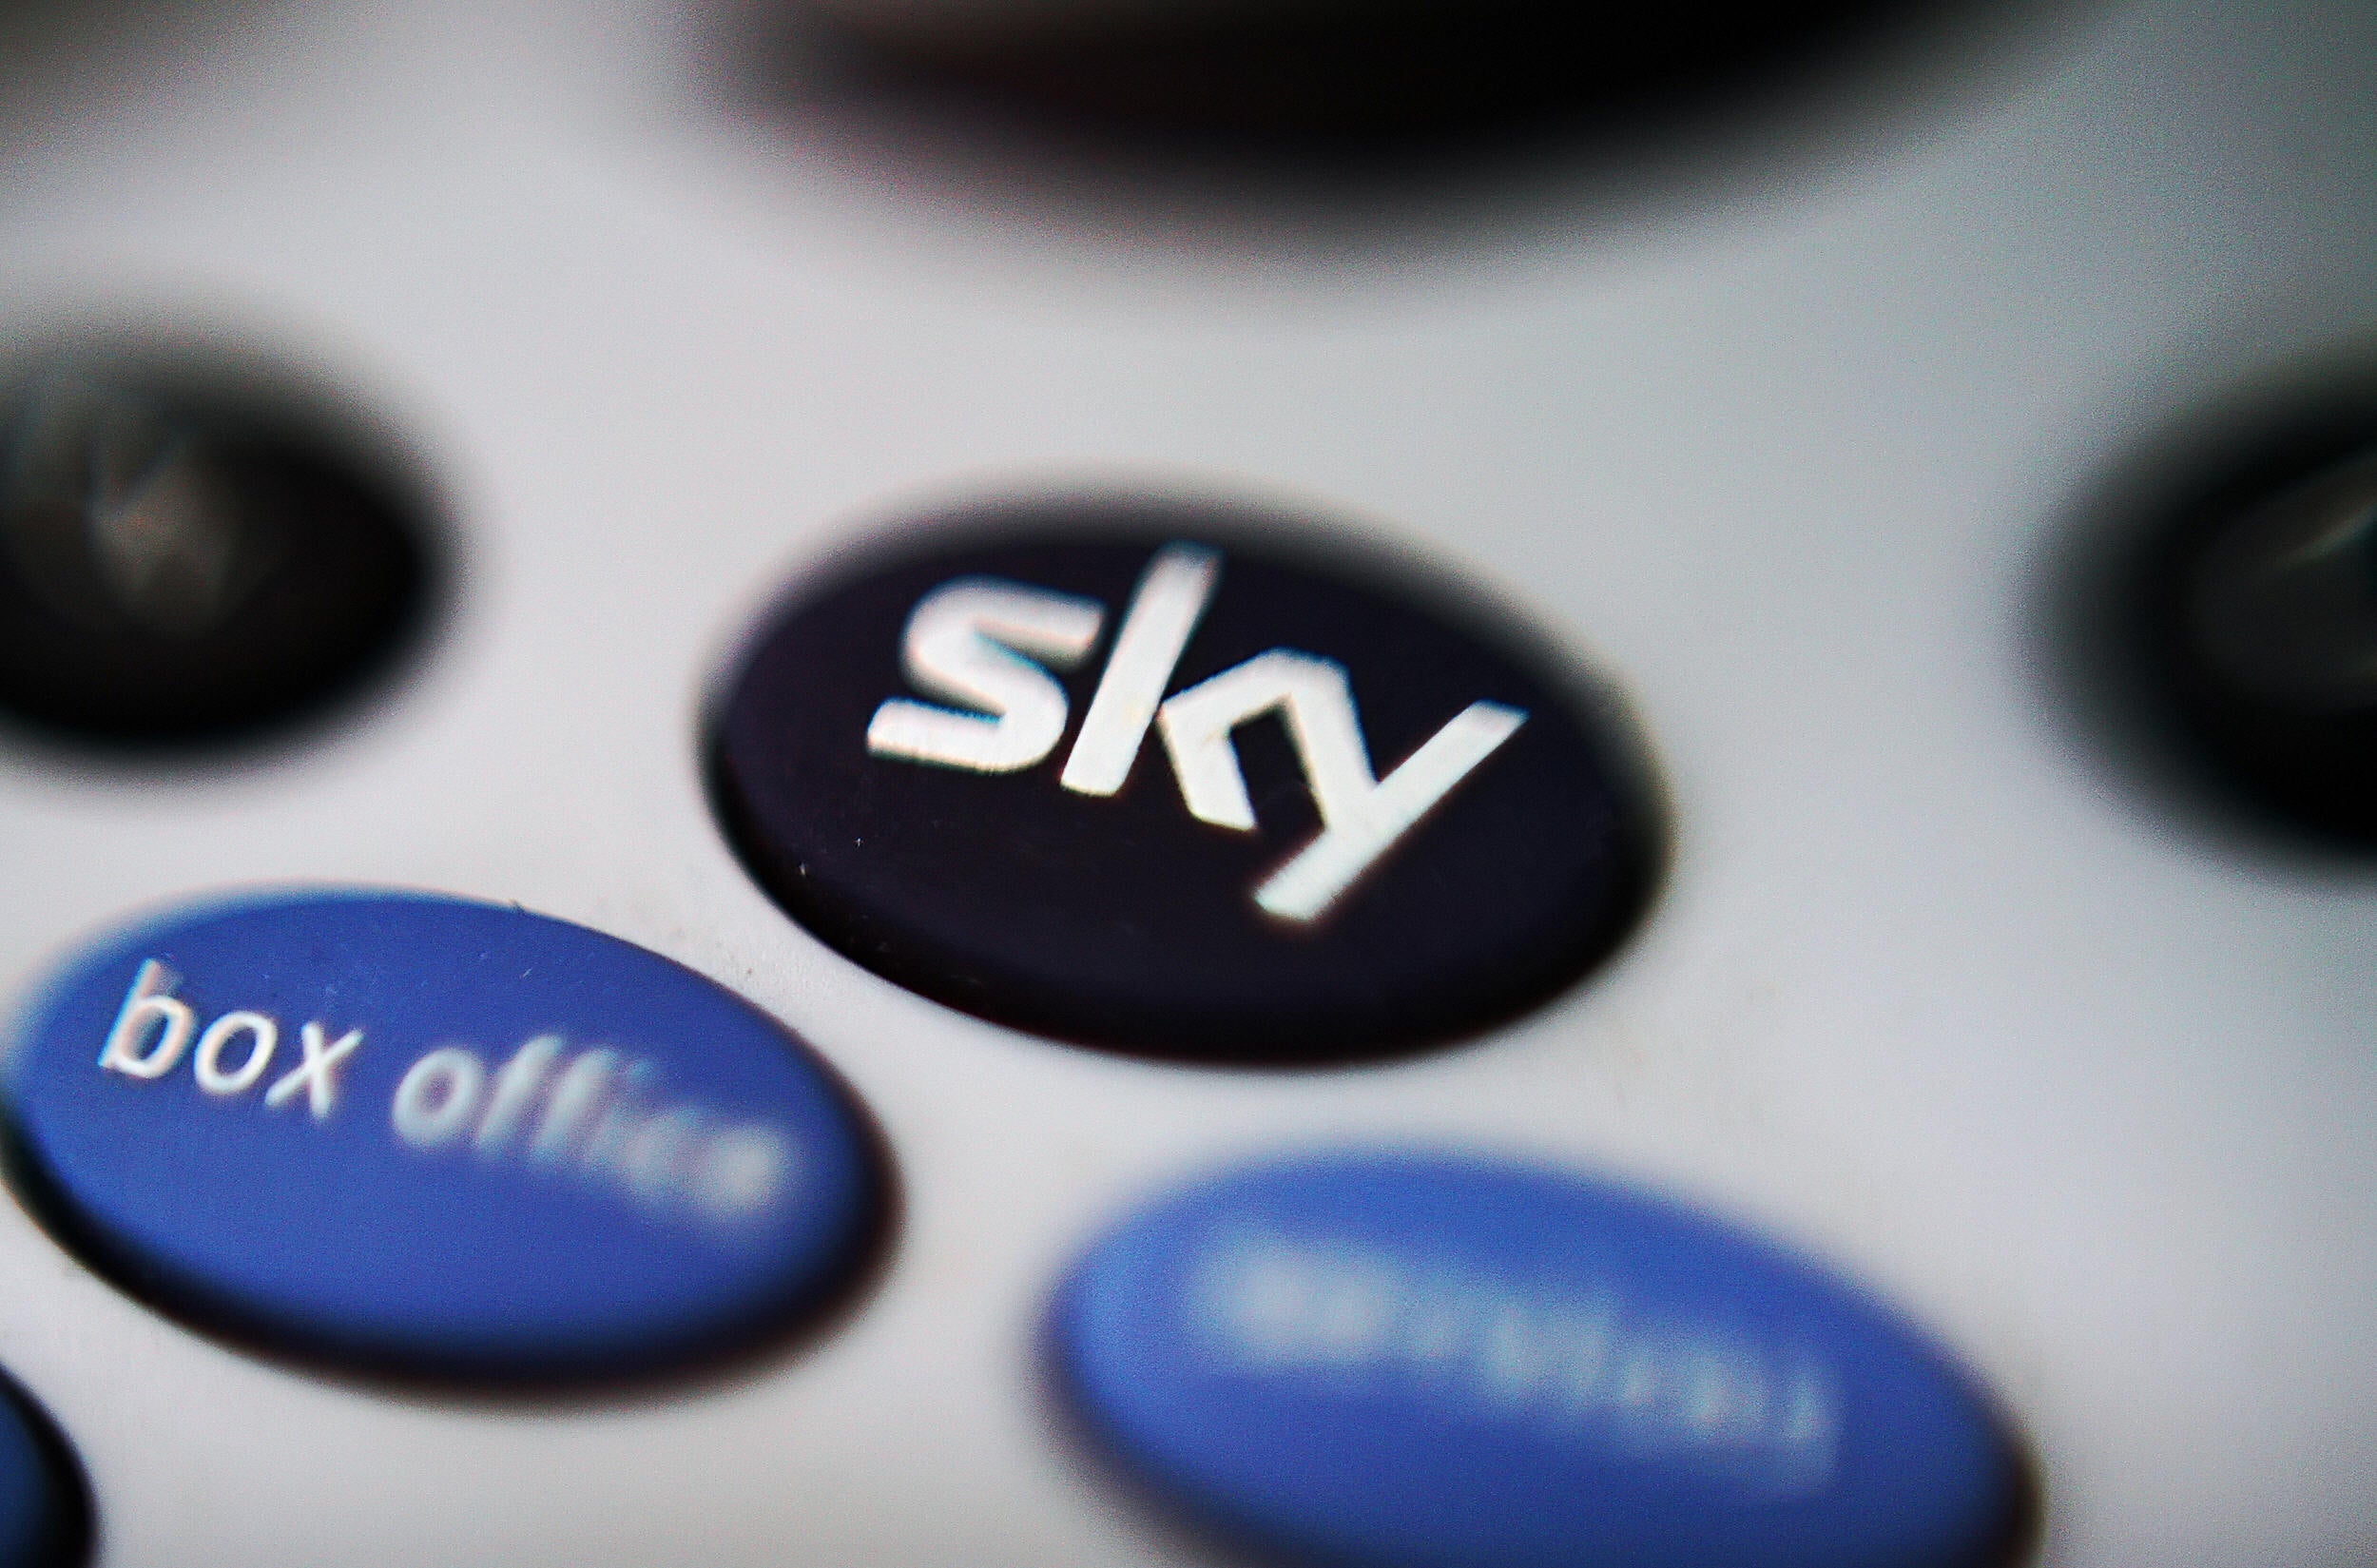 Boost for Sky as consumers splash out on HD and broadband